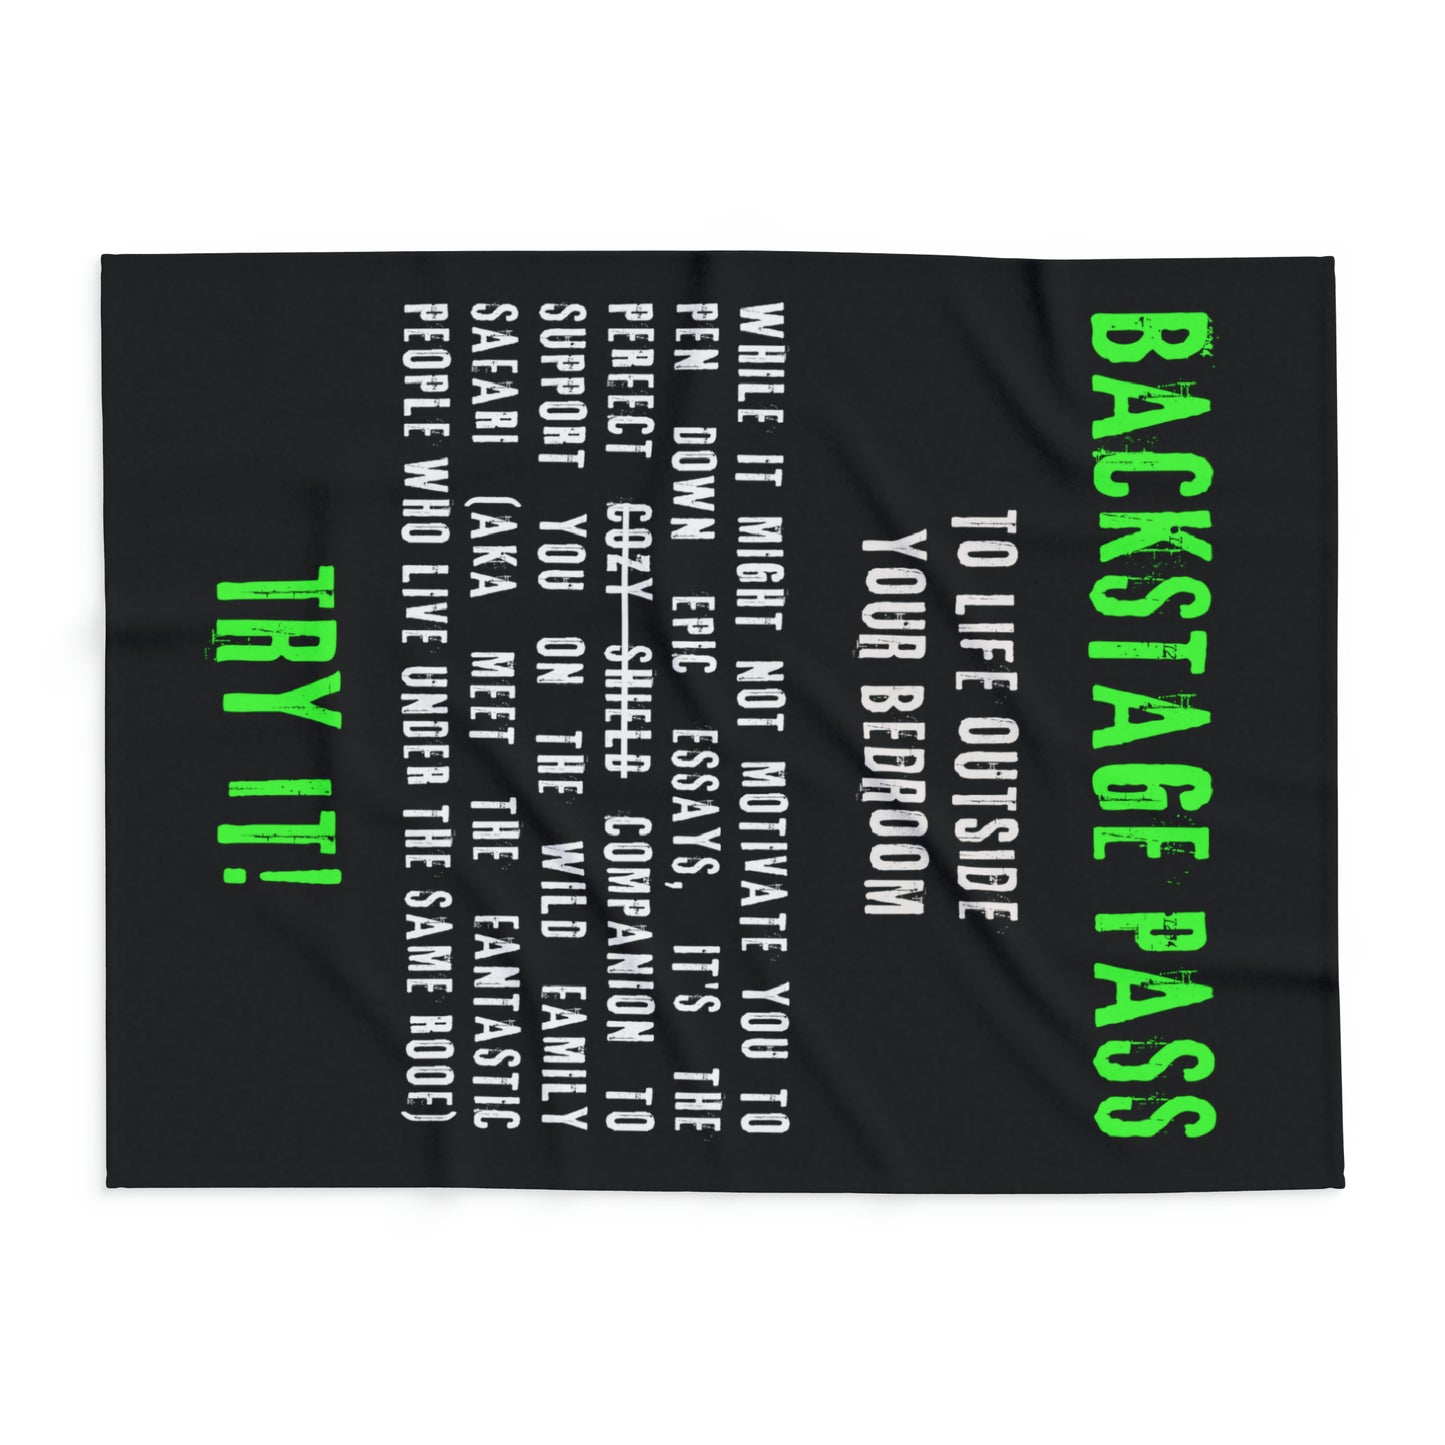 'Humor in the Cold' Black Arctic Fleece Blanket: Embrace the family safari with a Warm Hug